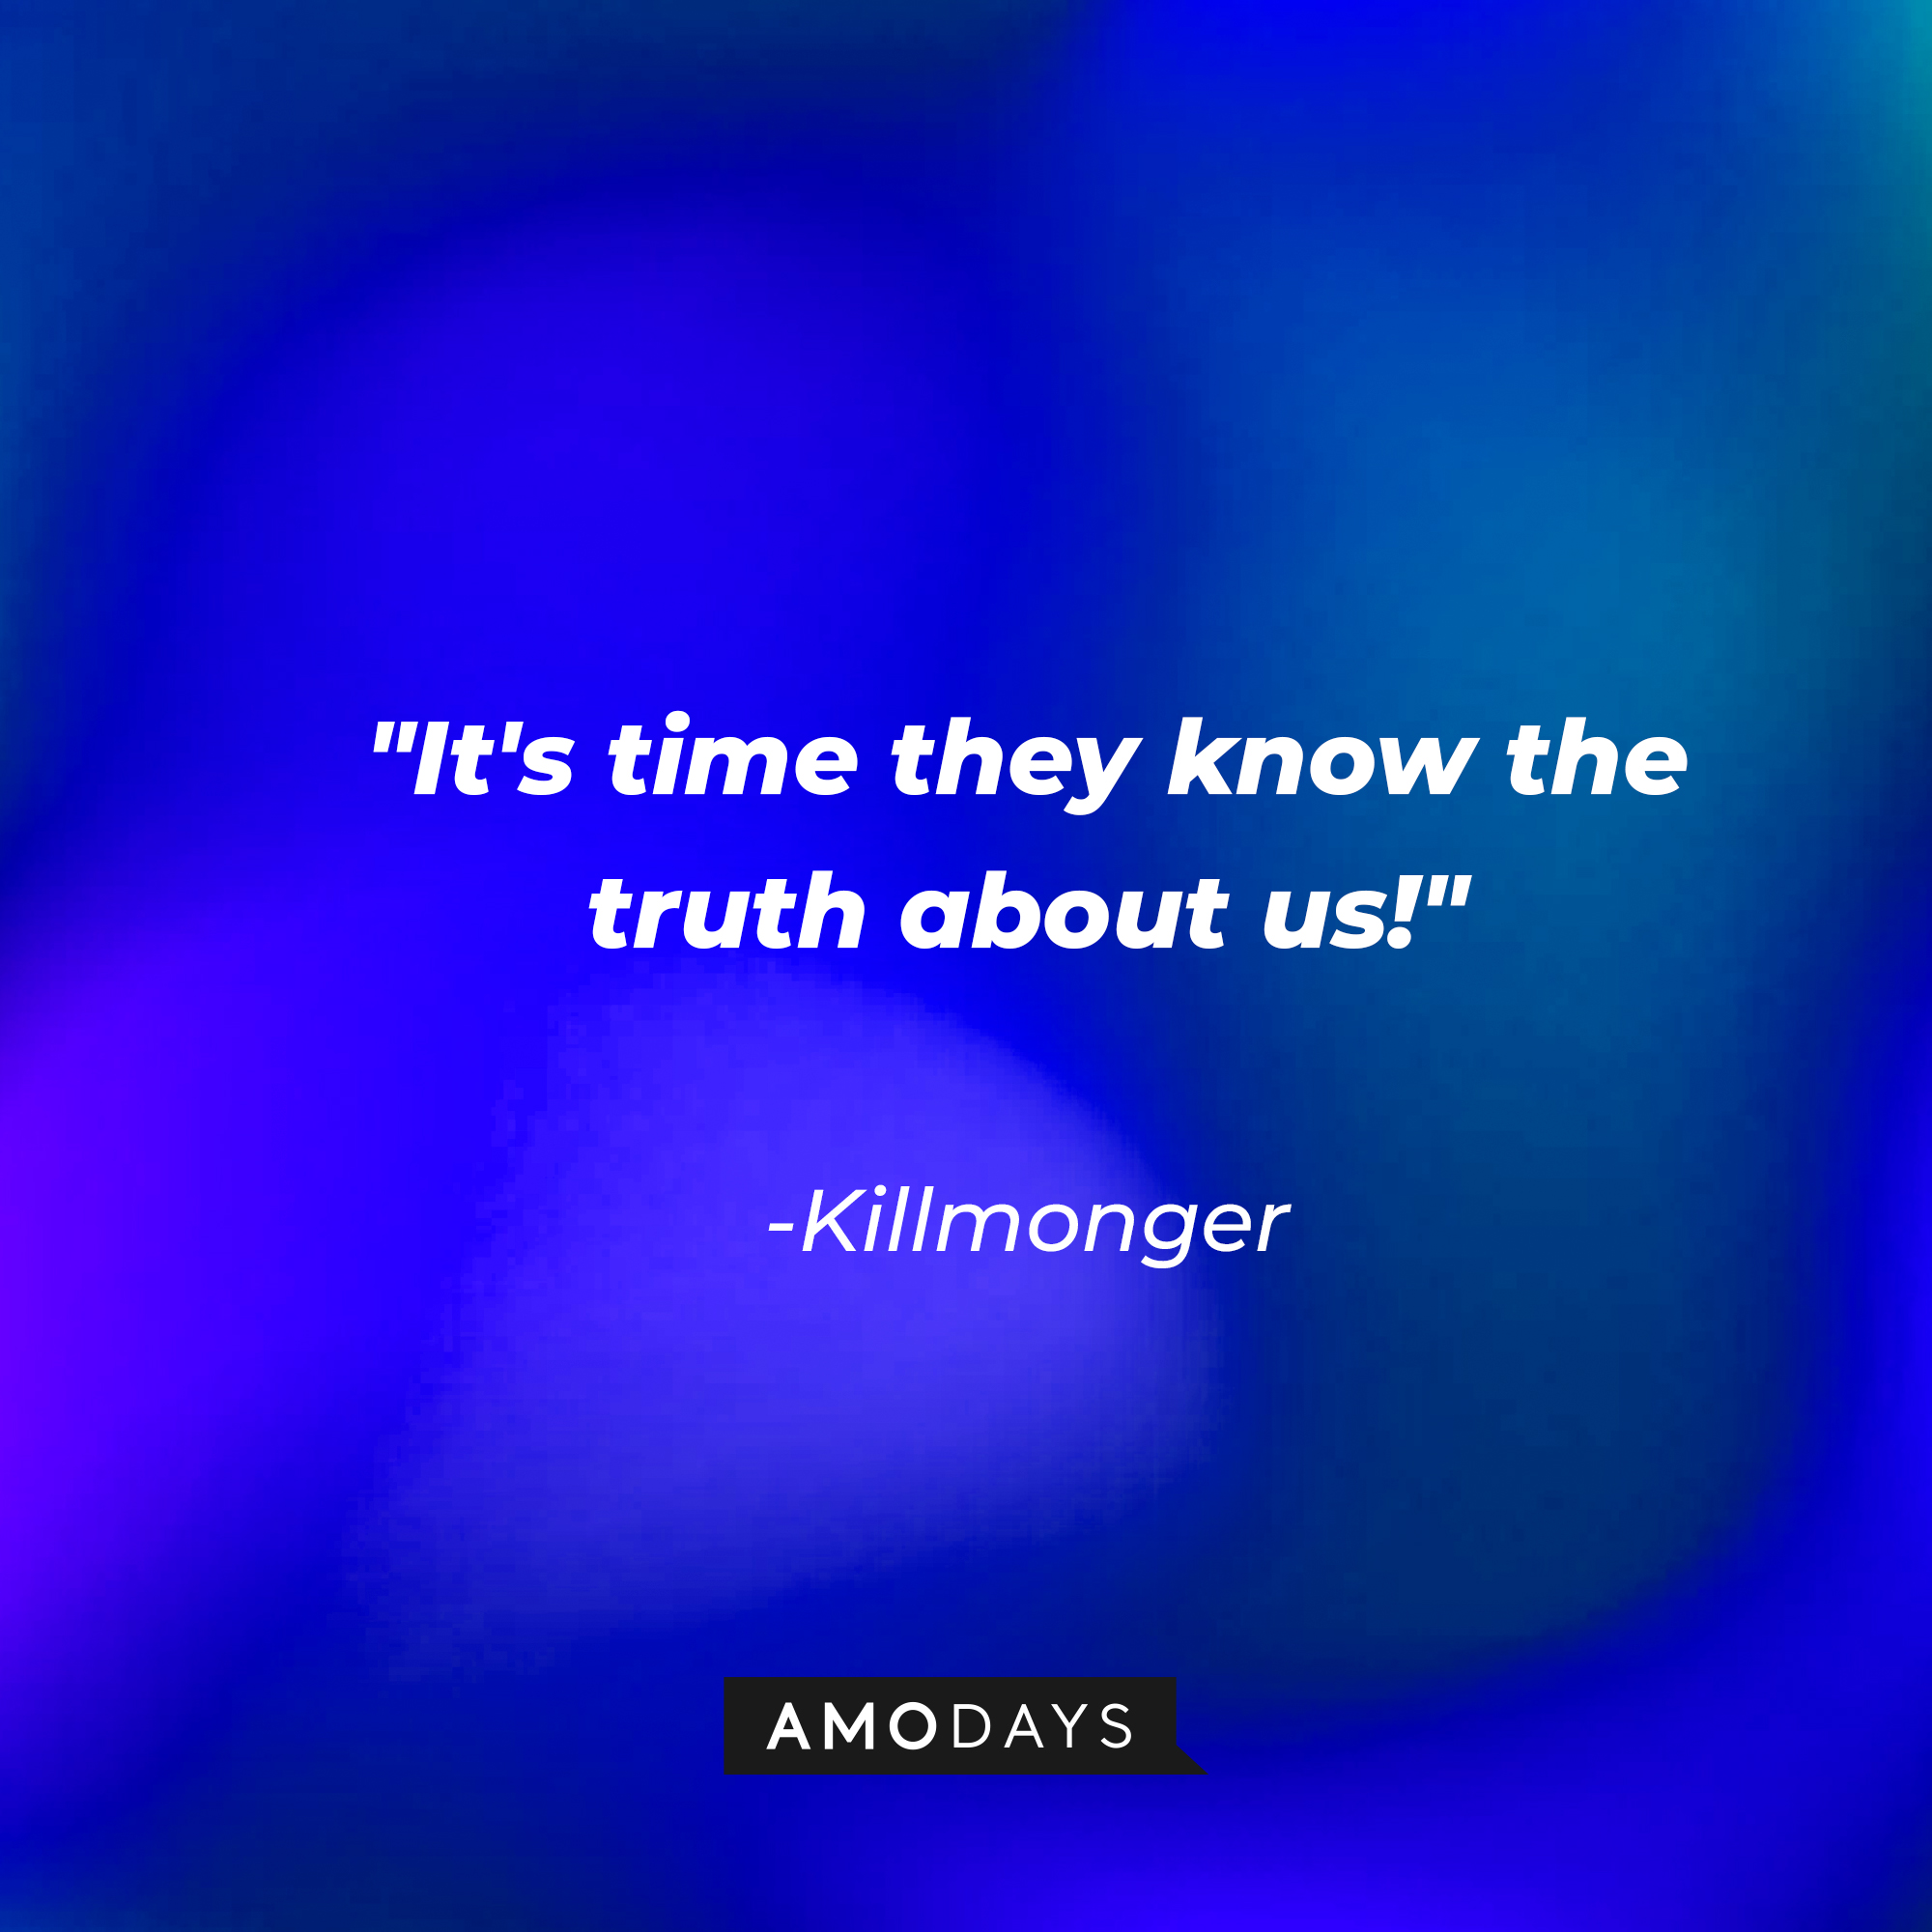 Killmonger's quote: "It's time they know the truth about us!" | Source: AmoDays